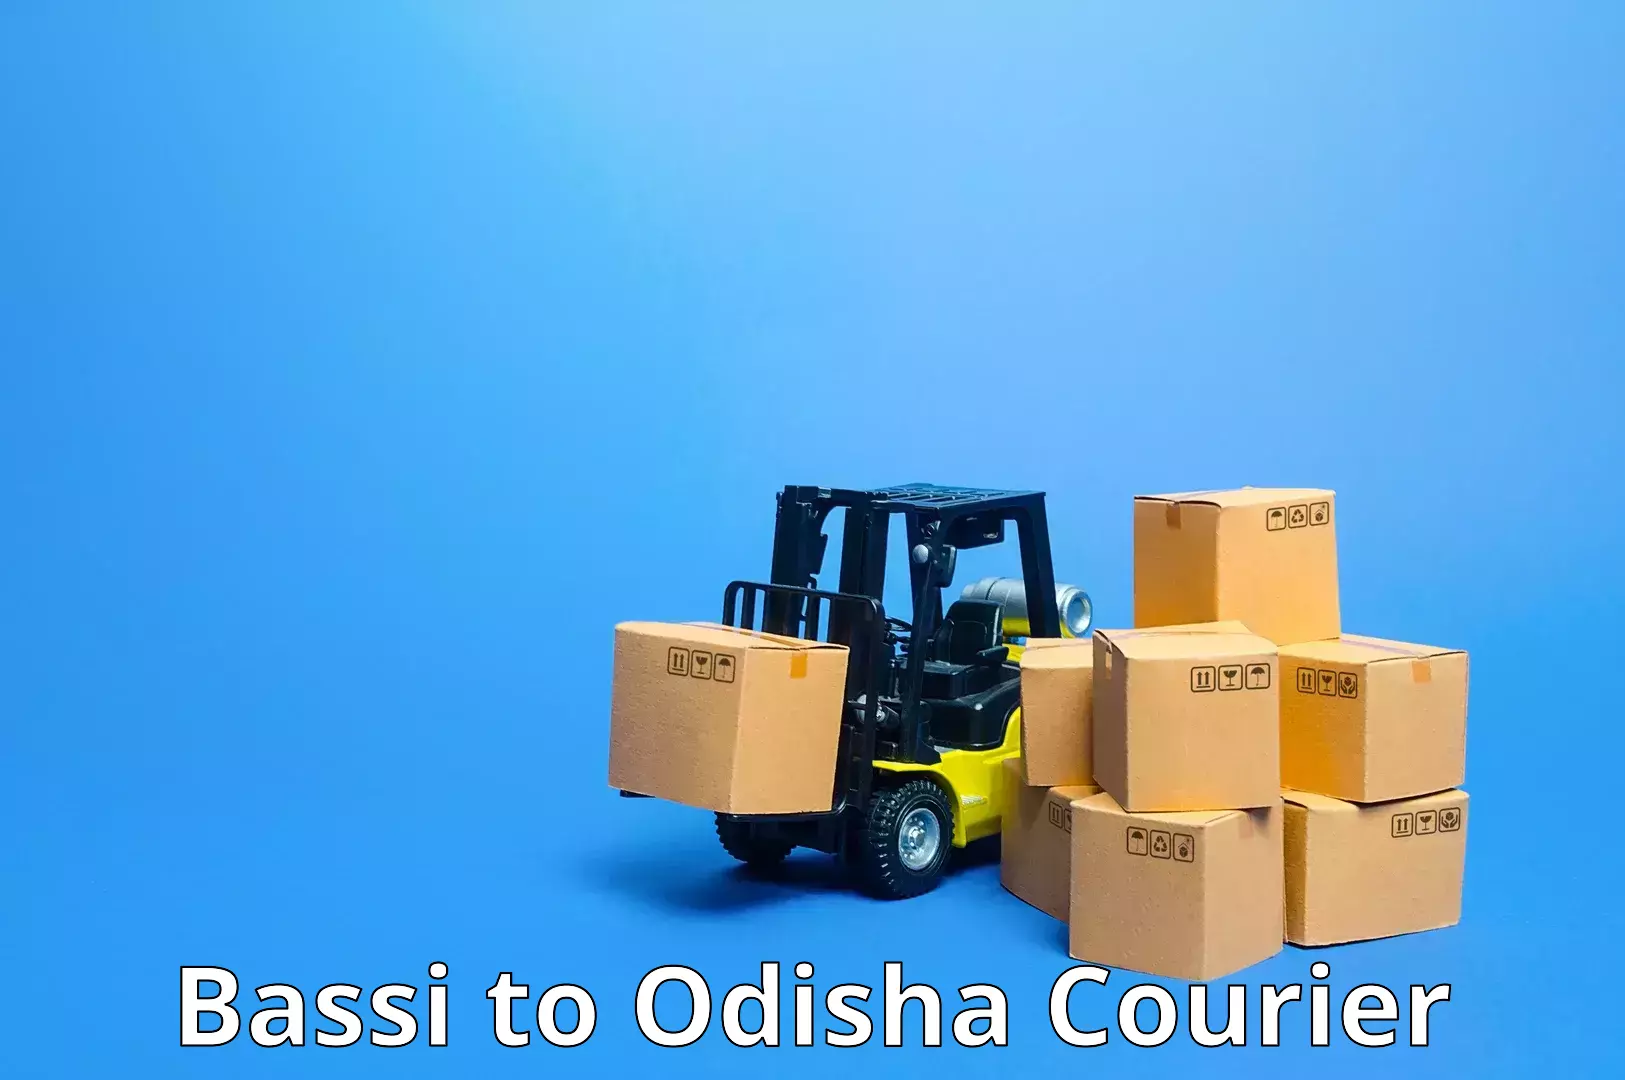 State-of-the-art courier technology Bassi to Patnagarh